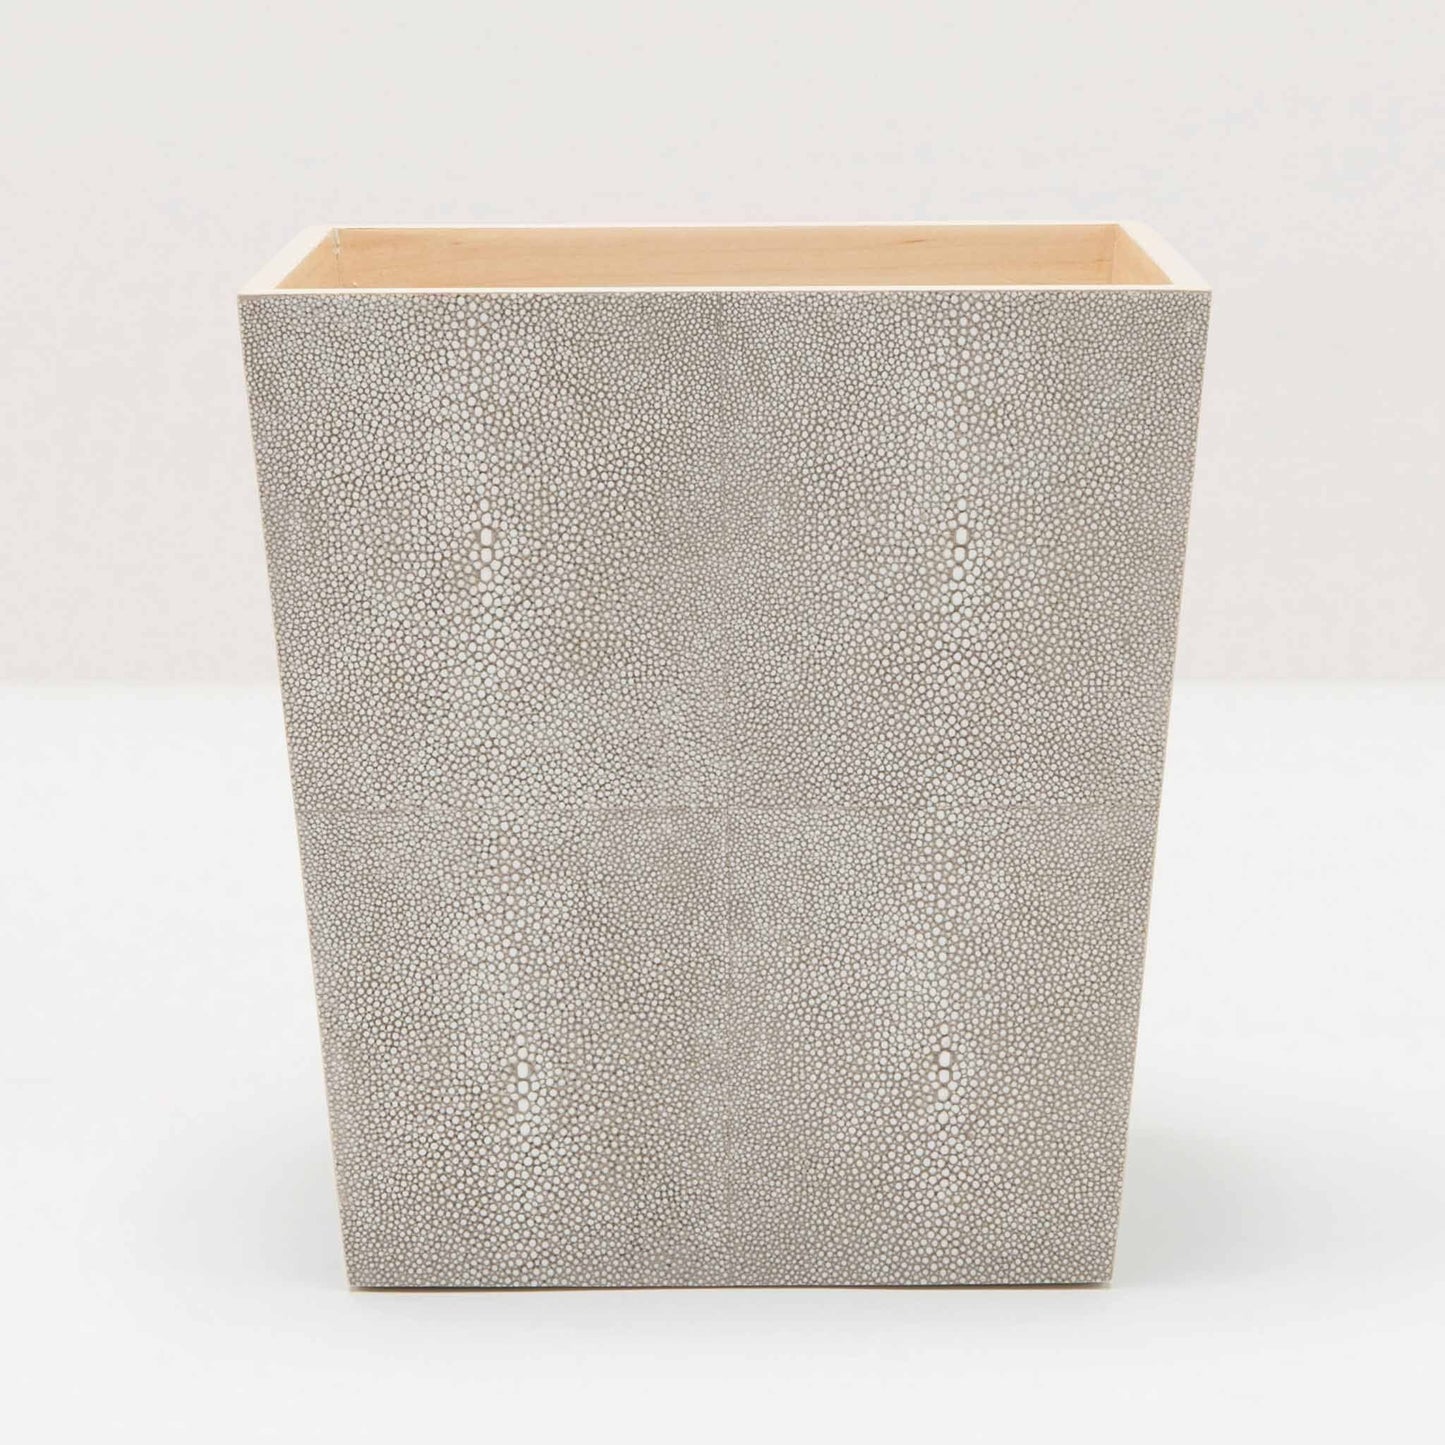 pigeon and poodle crosby wastebasket sand faux shagreen